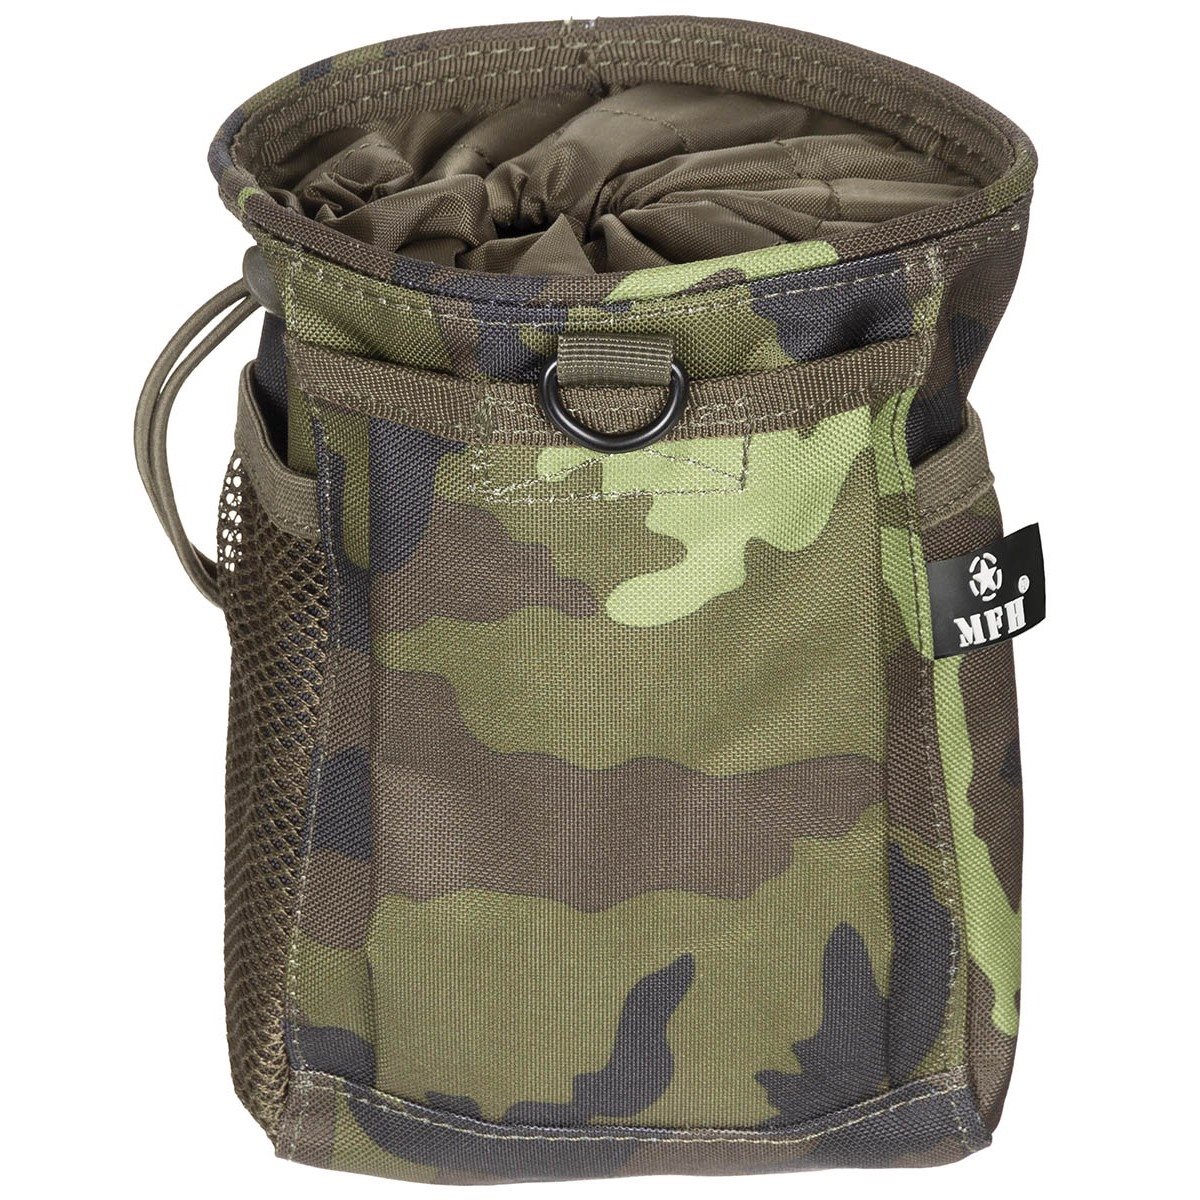 US EMTPY DUMP SHELL ARMY MILITARY POUCH Tasche COYOTE 